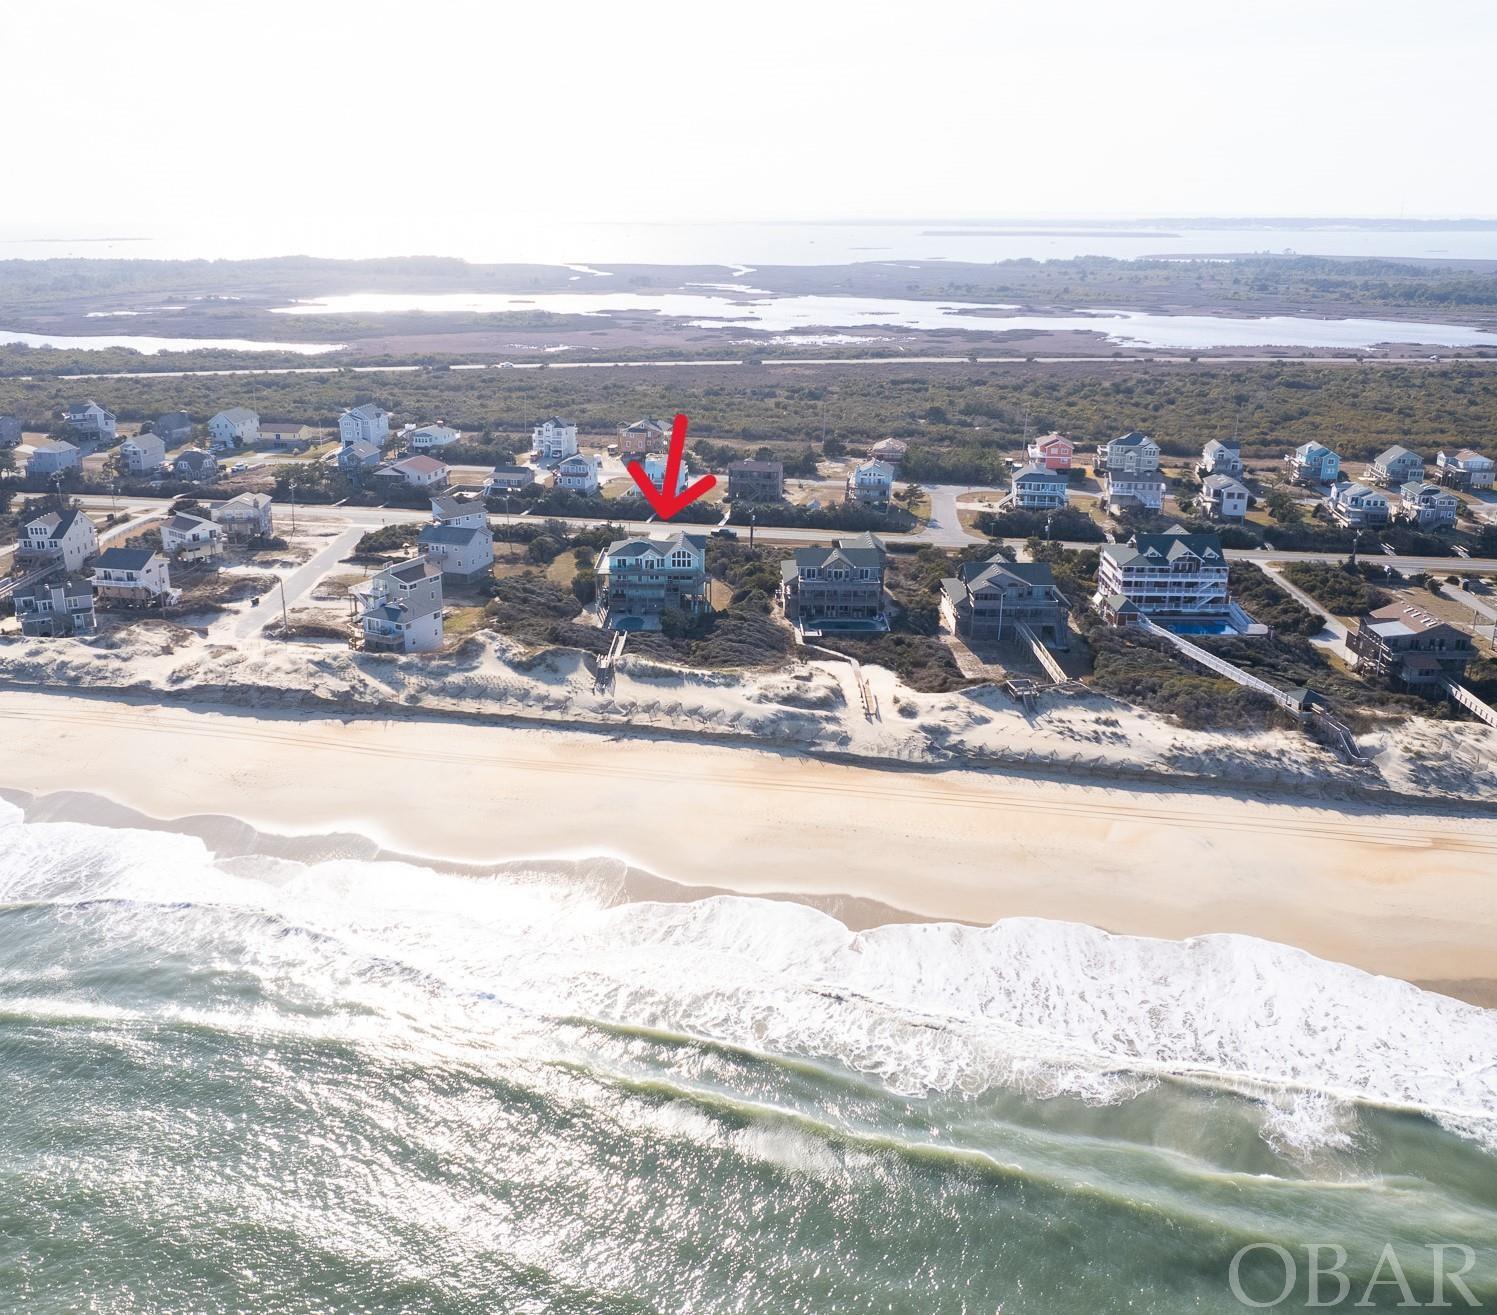 10405 Old Oregon Inlet Road, Nags Head, NC 27959, 8 Bedrooms Bedrooms, ,7 BathroomsBathrooms,Residential,For sale,Old Oregon Inlet Road,124628